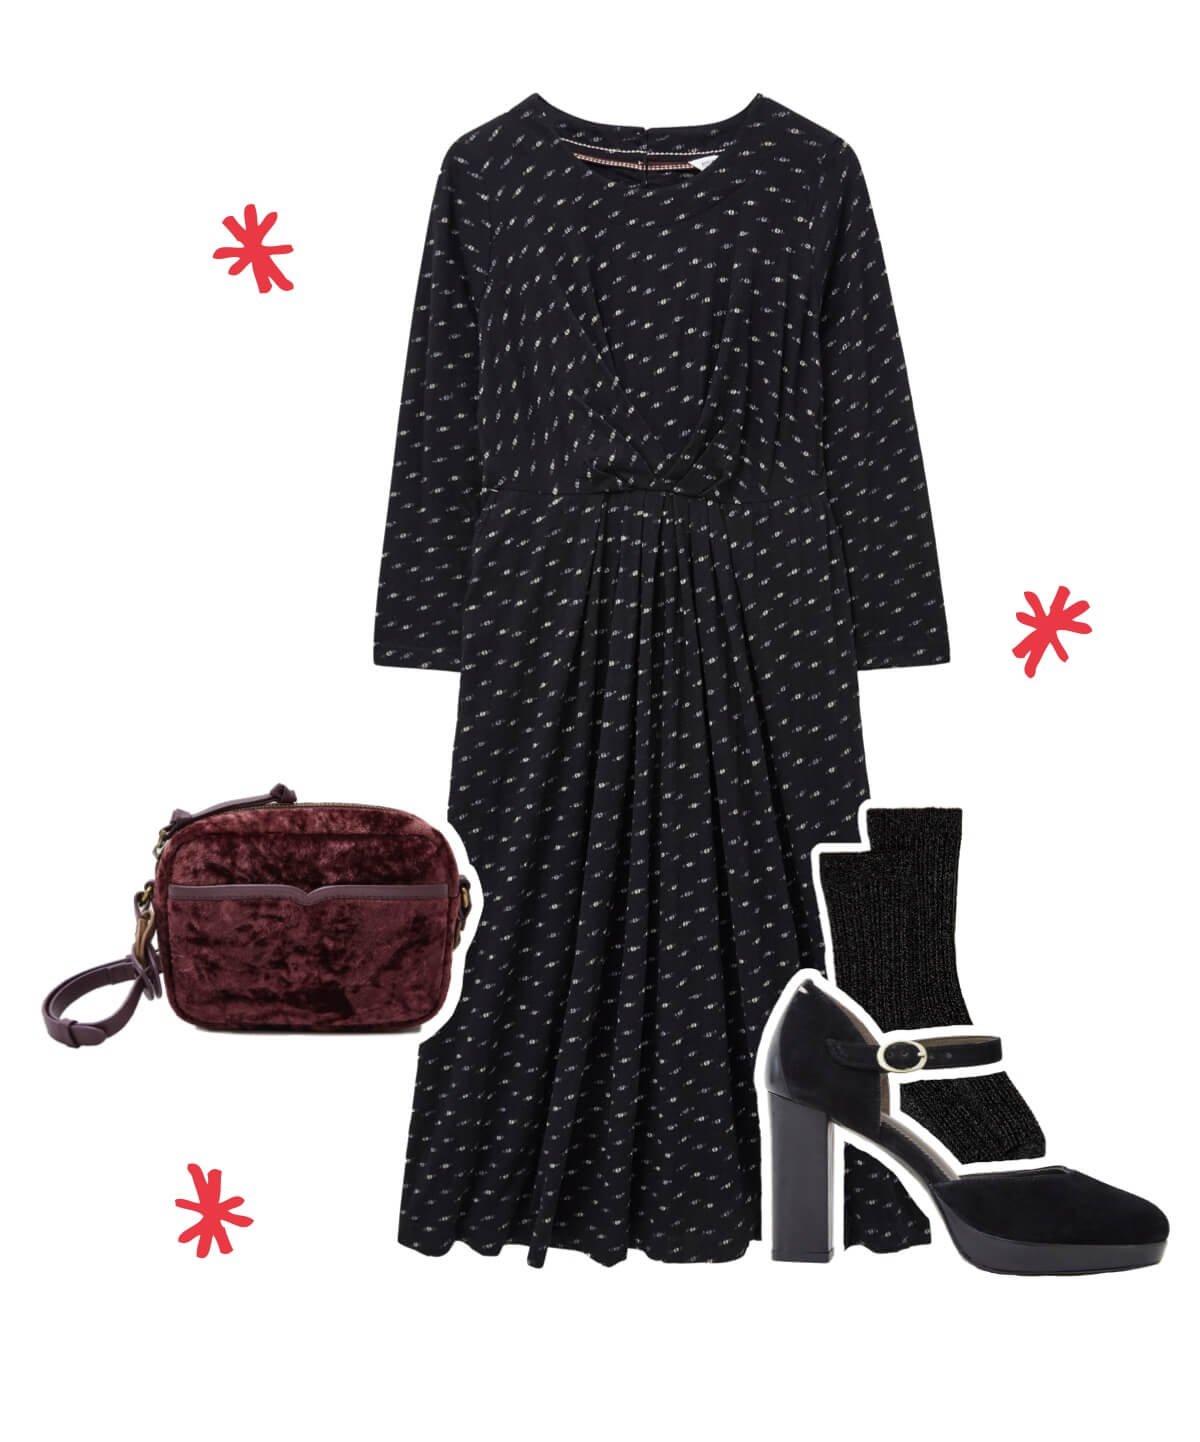 christmaspartywearguide_outfit3